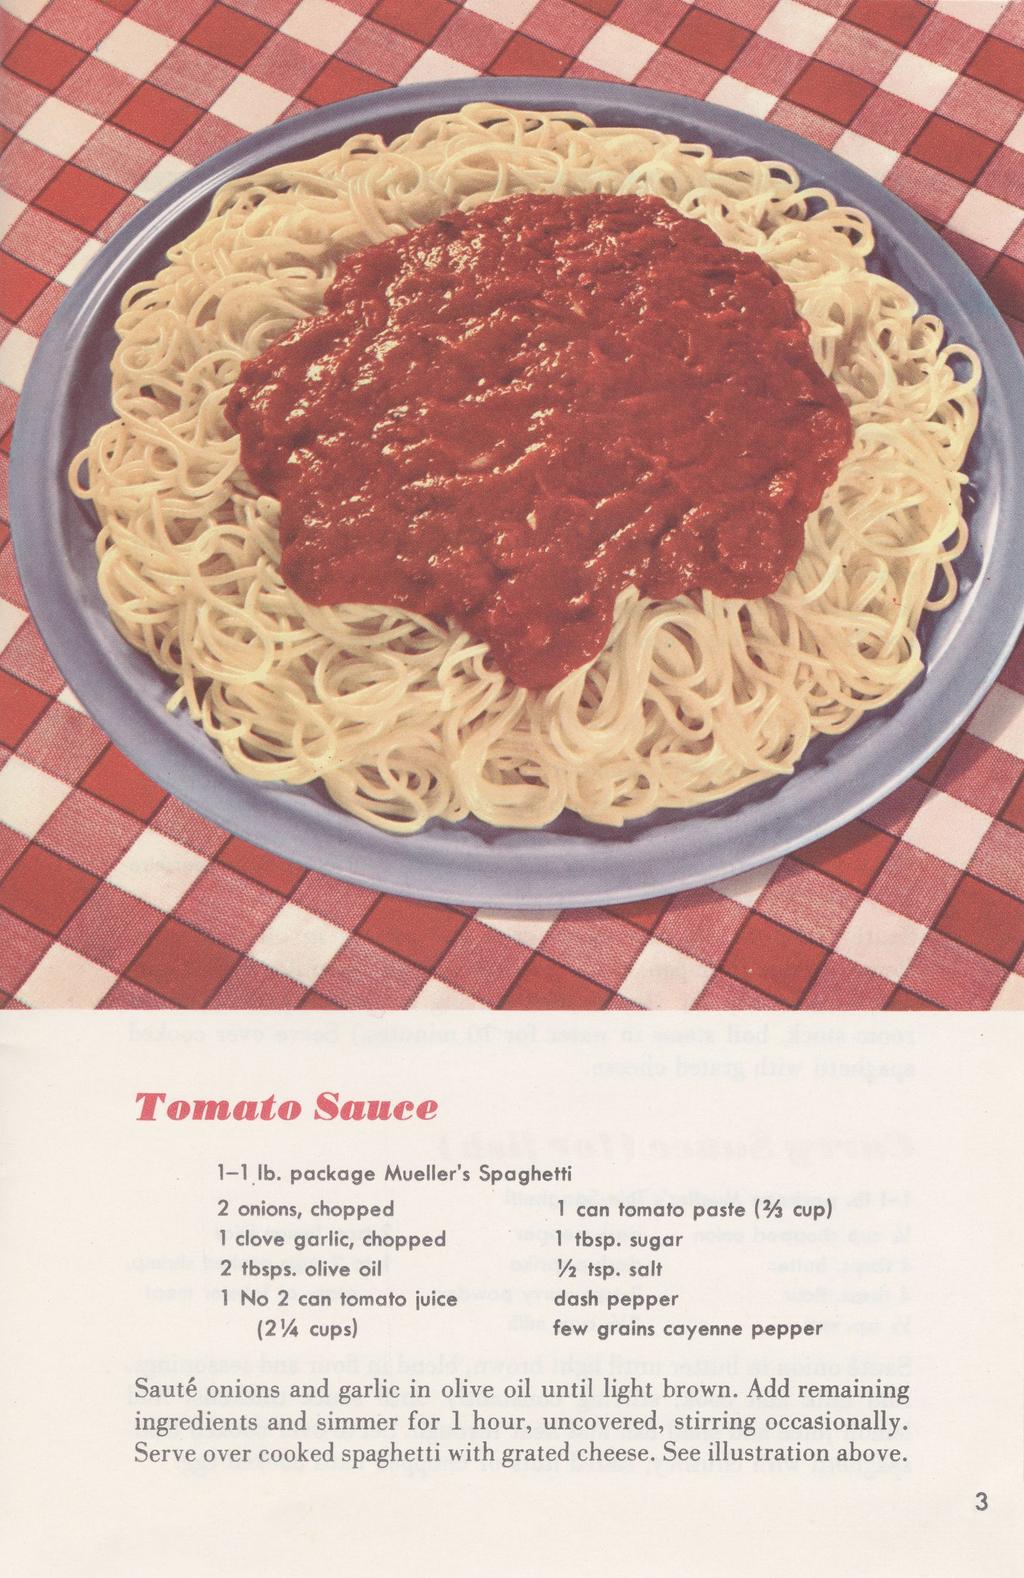 Tomato Sauee 1-1 lb. package Mueller's Spaghetti 2 onions, chopped 1 clove garlic, chopped 2 tbsps. olive oil 1 No 2 can tomato juice (21/4 cups) 1 can tomato paste ( 2 A cup) 1 tbsp. sugar Vi tsp.